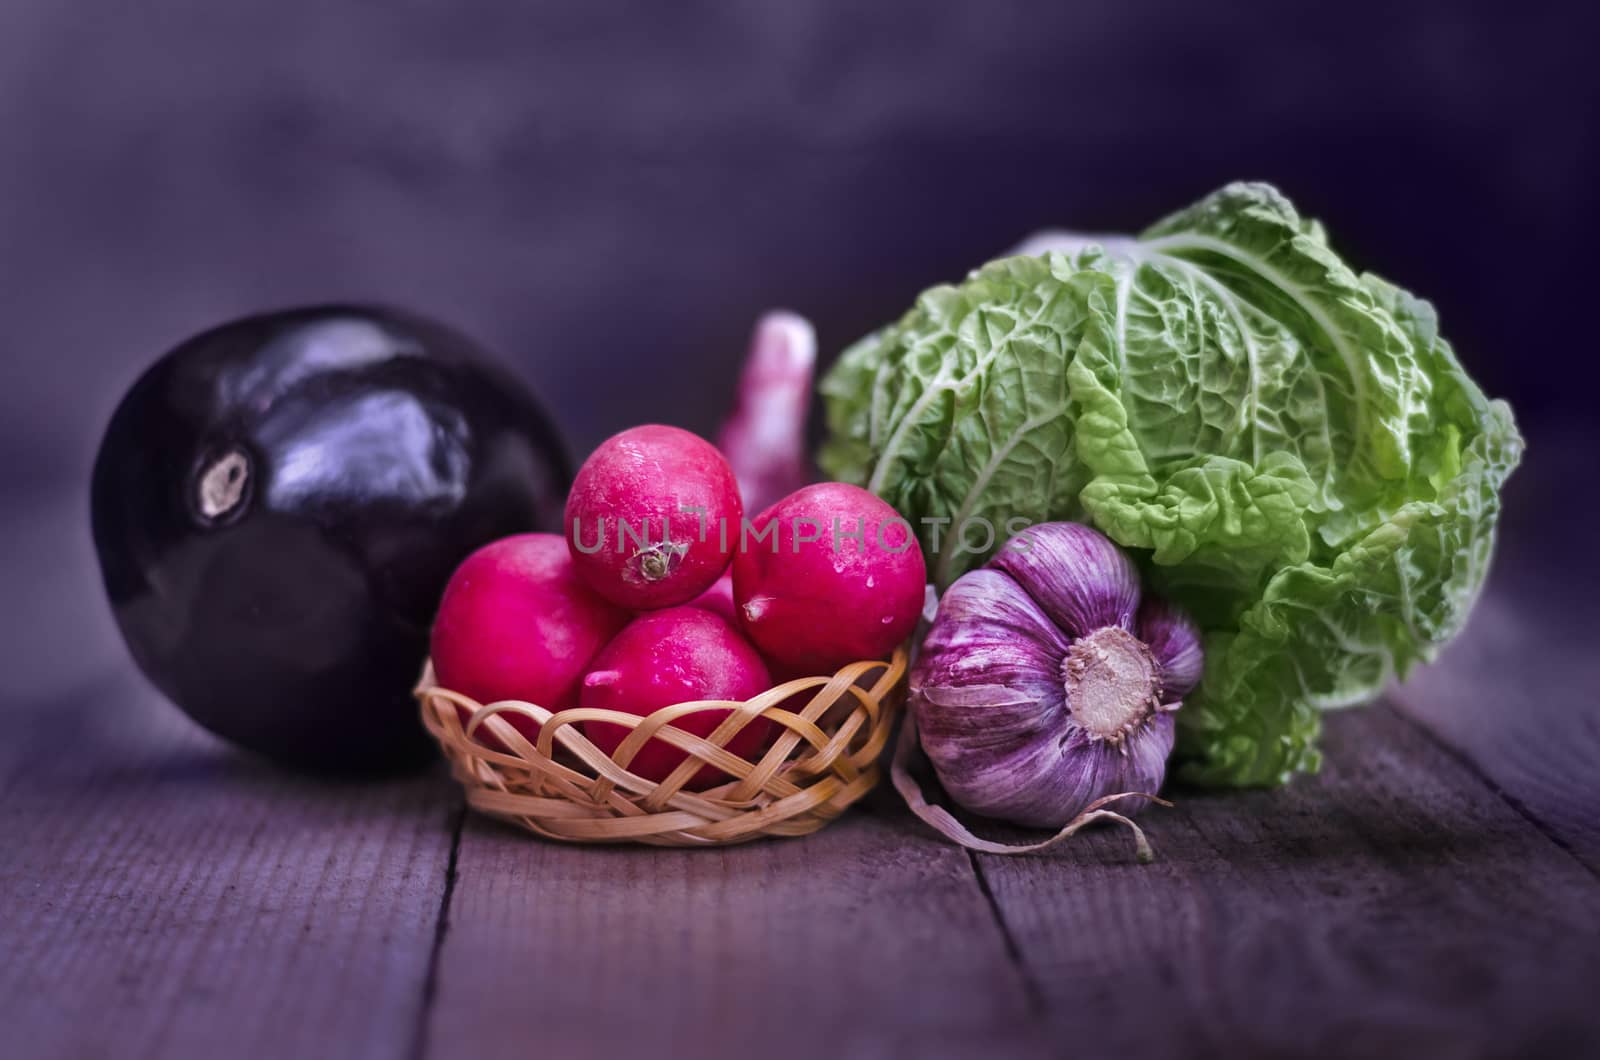 Radishes,garlic,cabbage and eggplant, on the old boards and blurred background. Rustic style, stained in purple color.